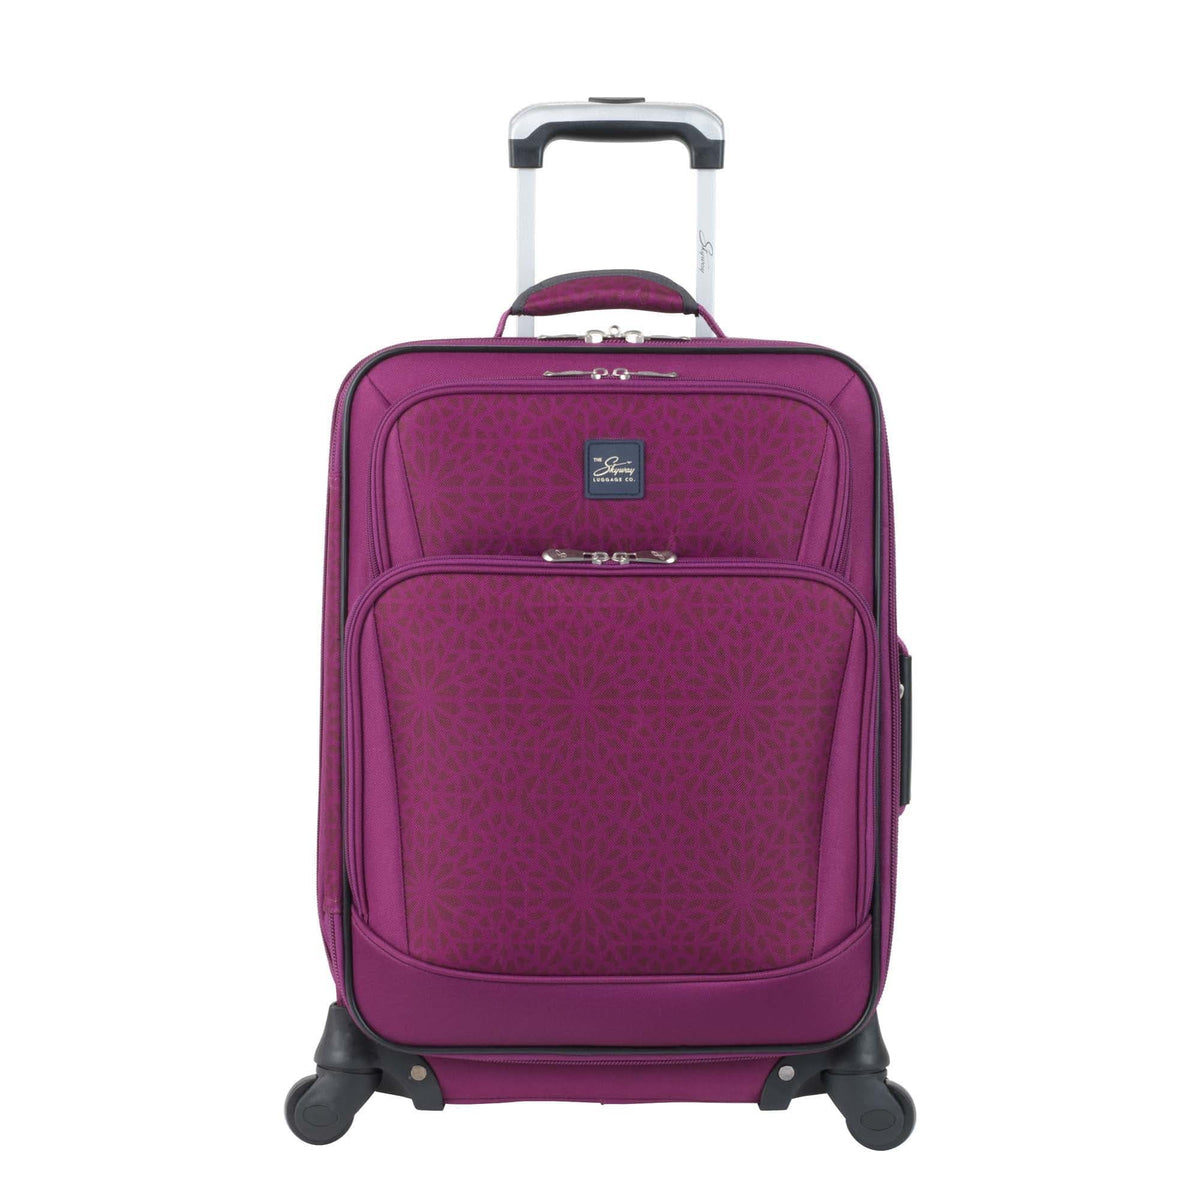 Skyway Epic SoftSide Spinner Carry-On Luggage